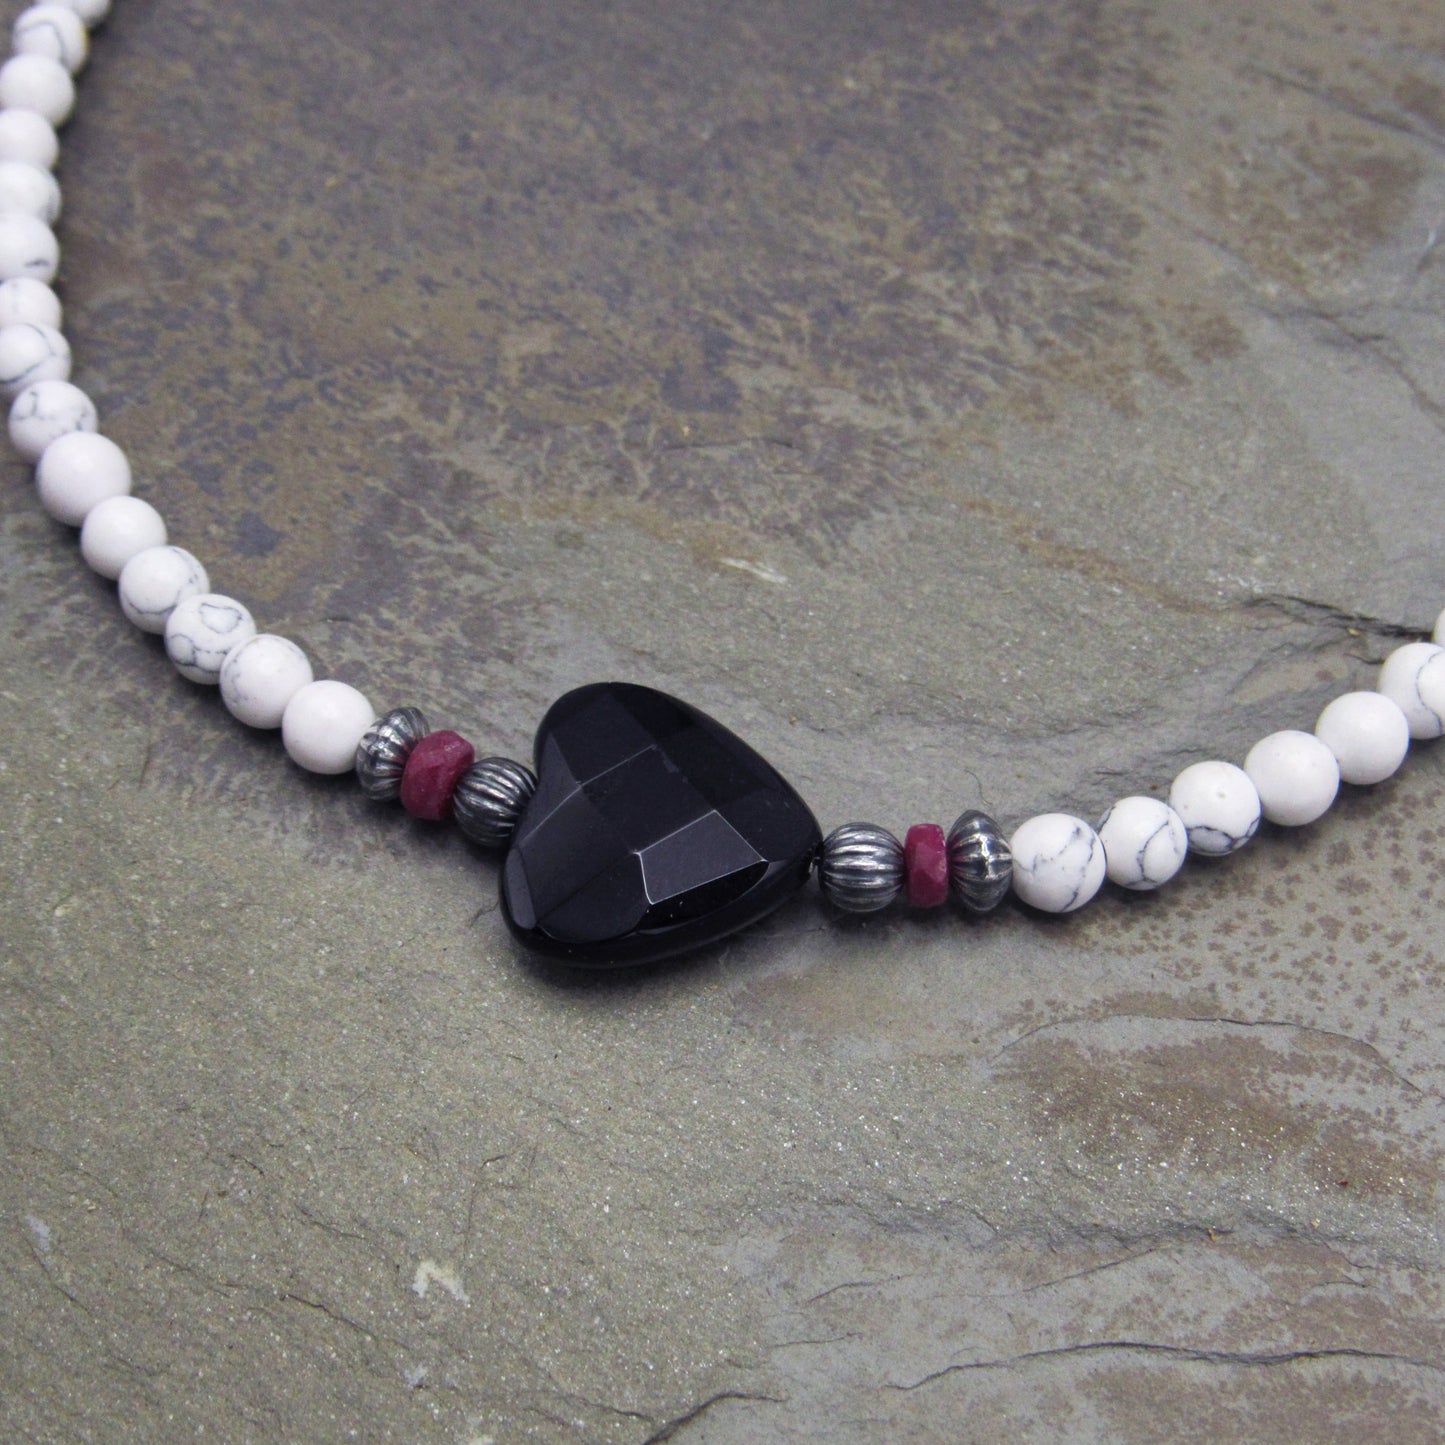 White Turquoise anklet with Onyx Heart, Rubies, and Oxidized Sterling Silver